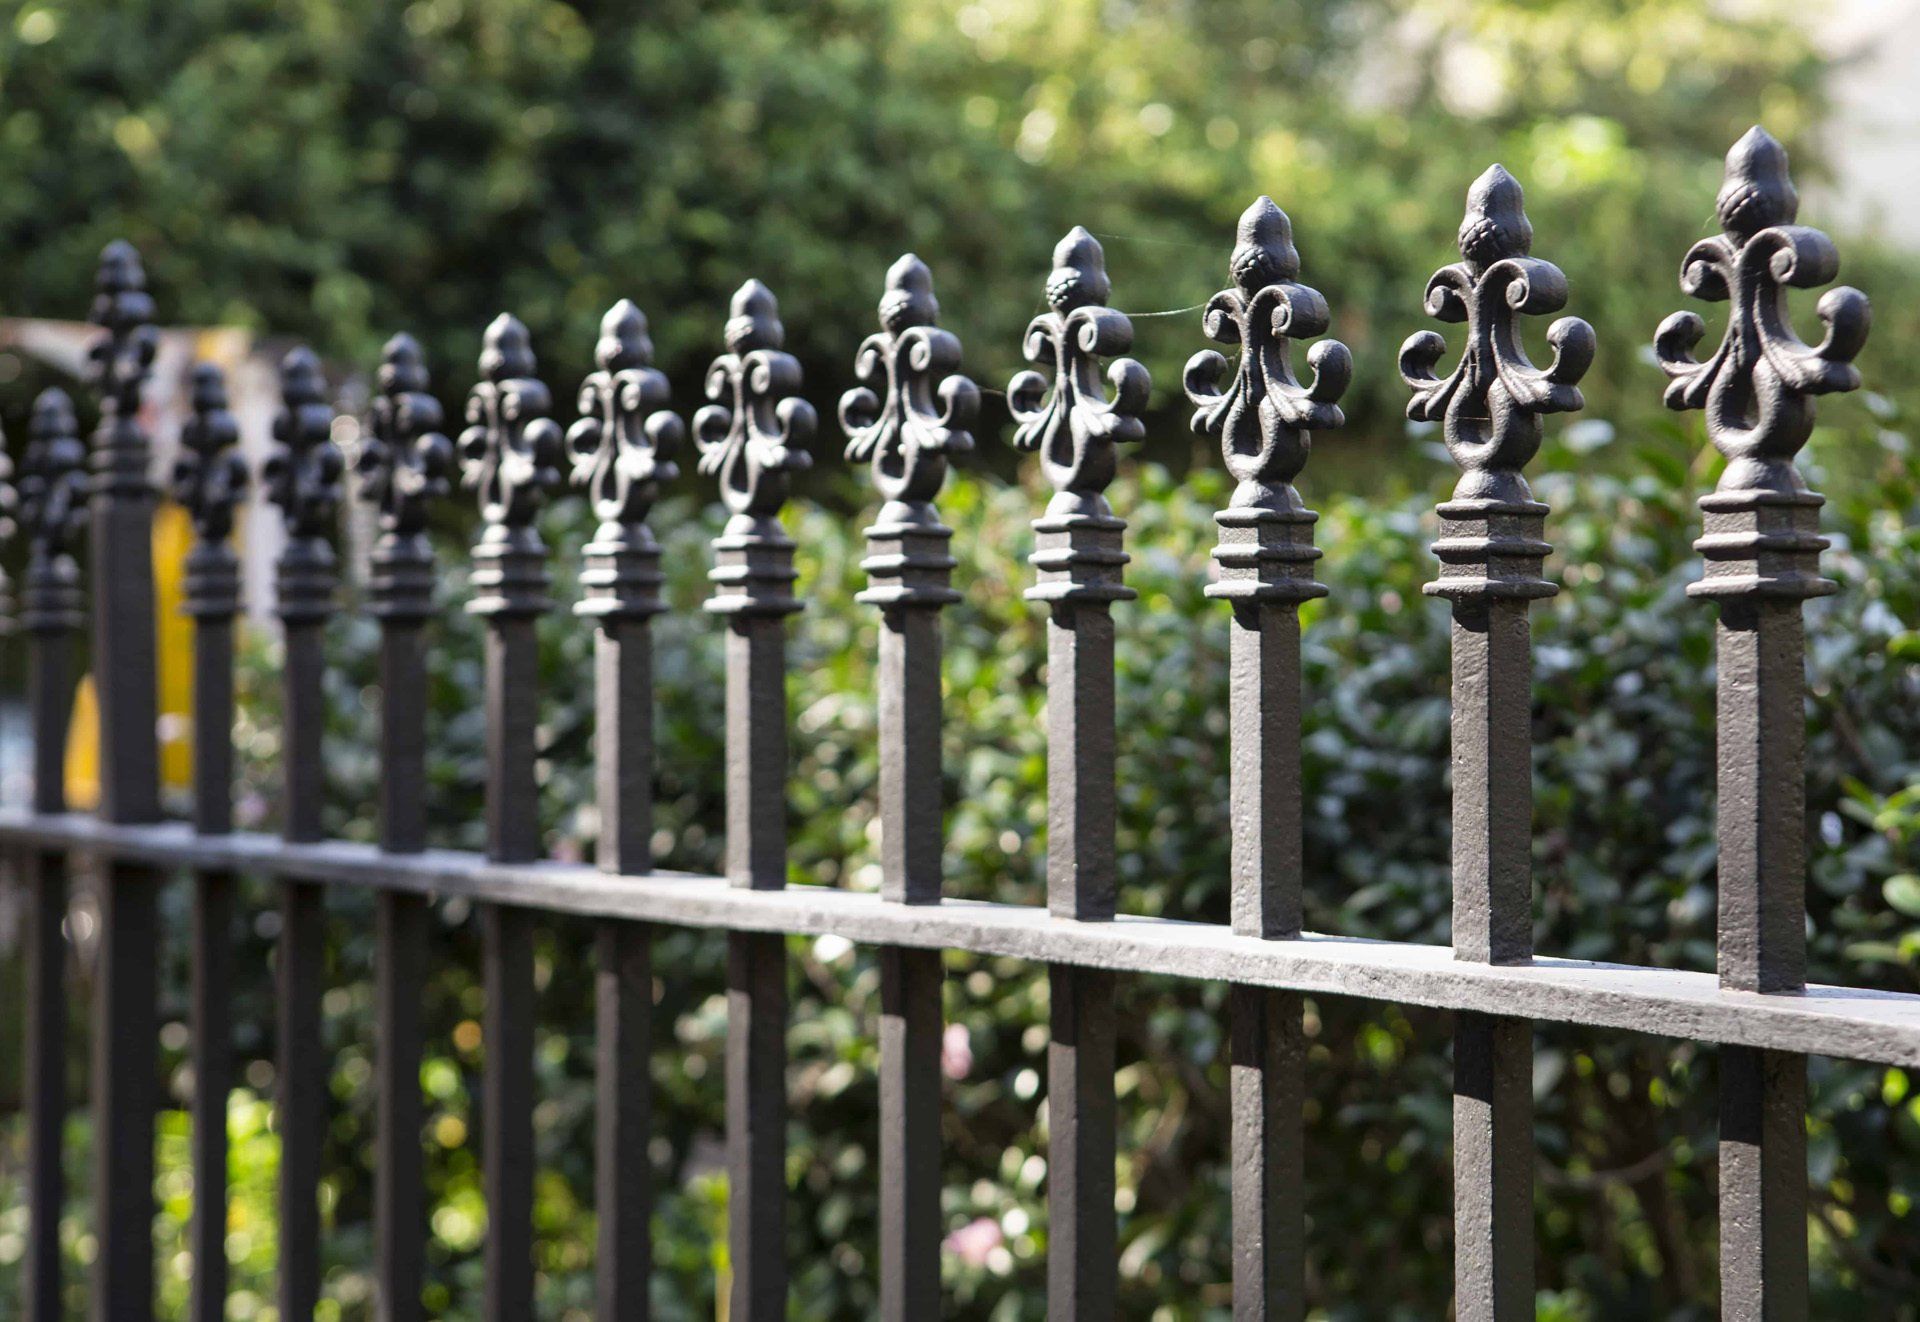 Wrought iron fence companies